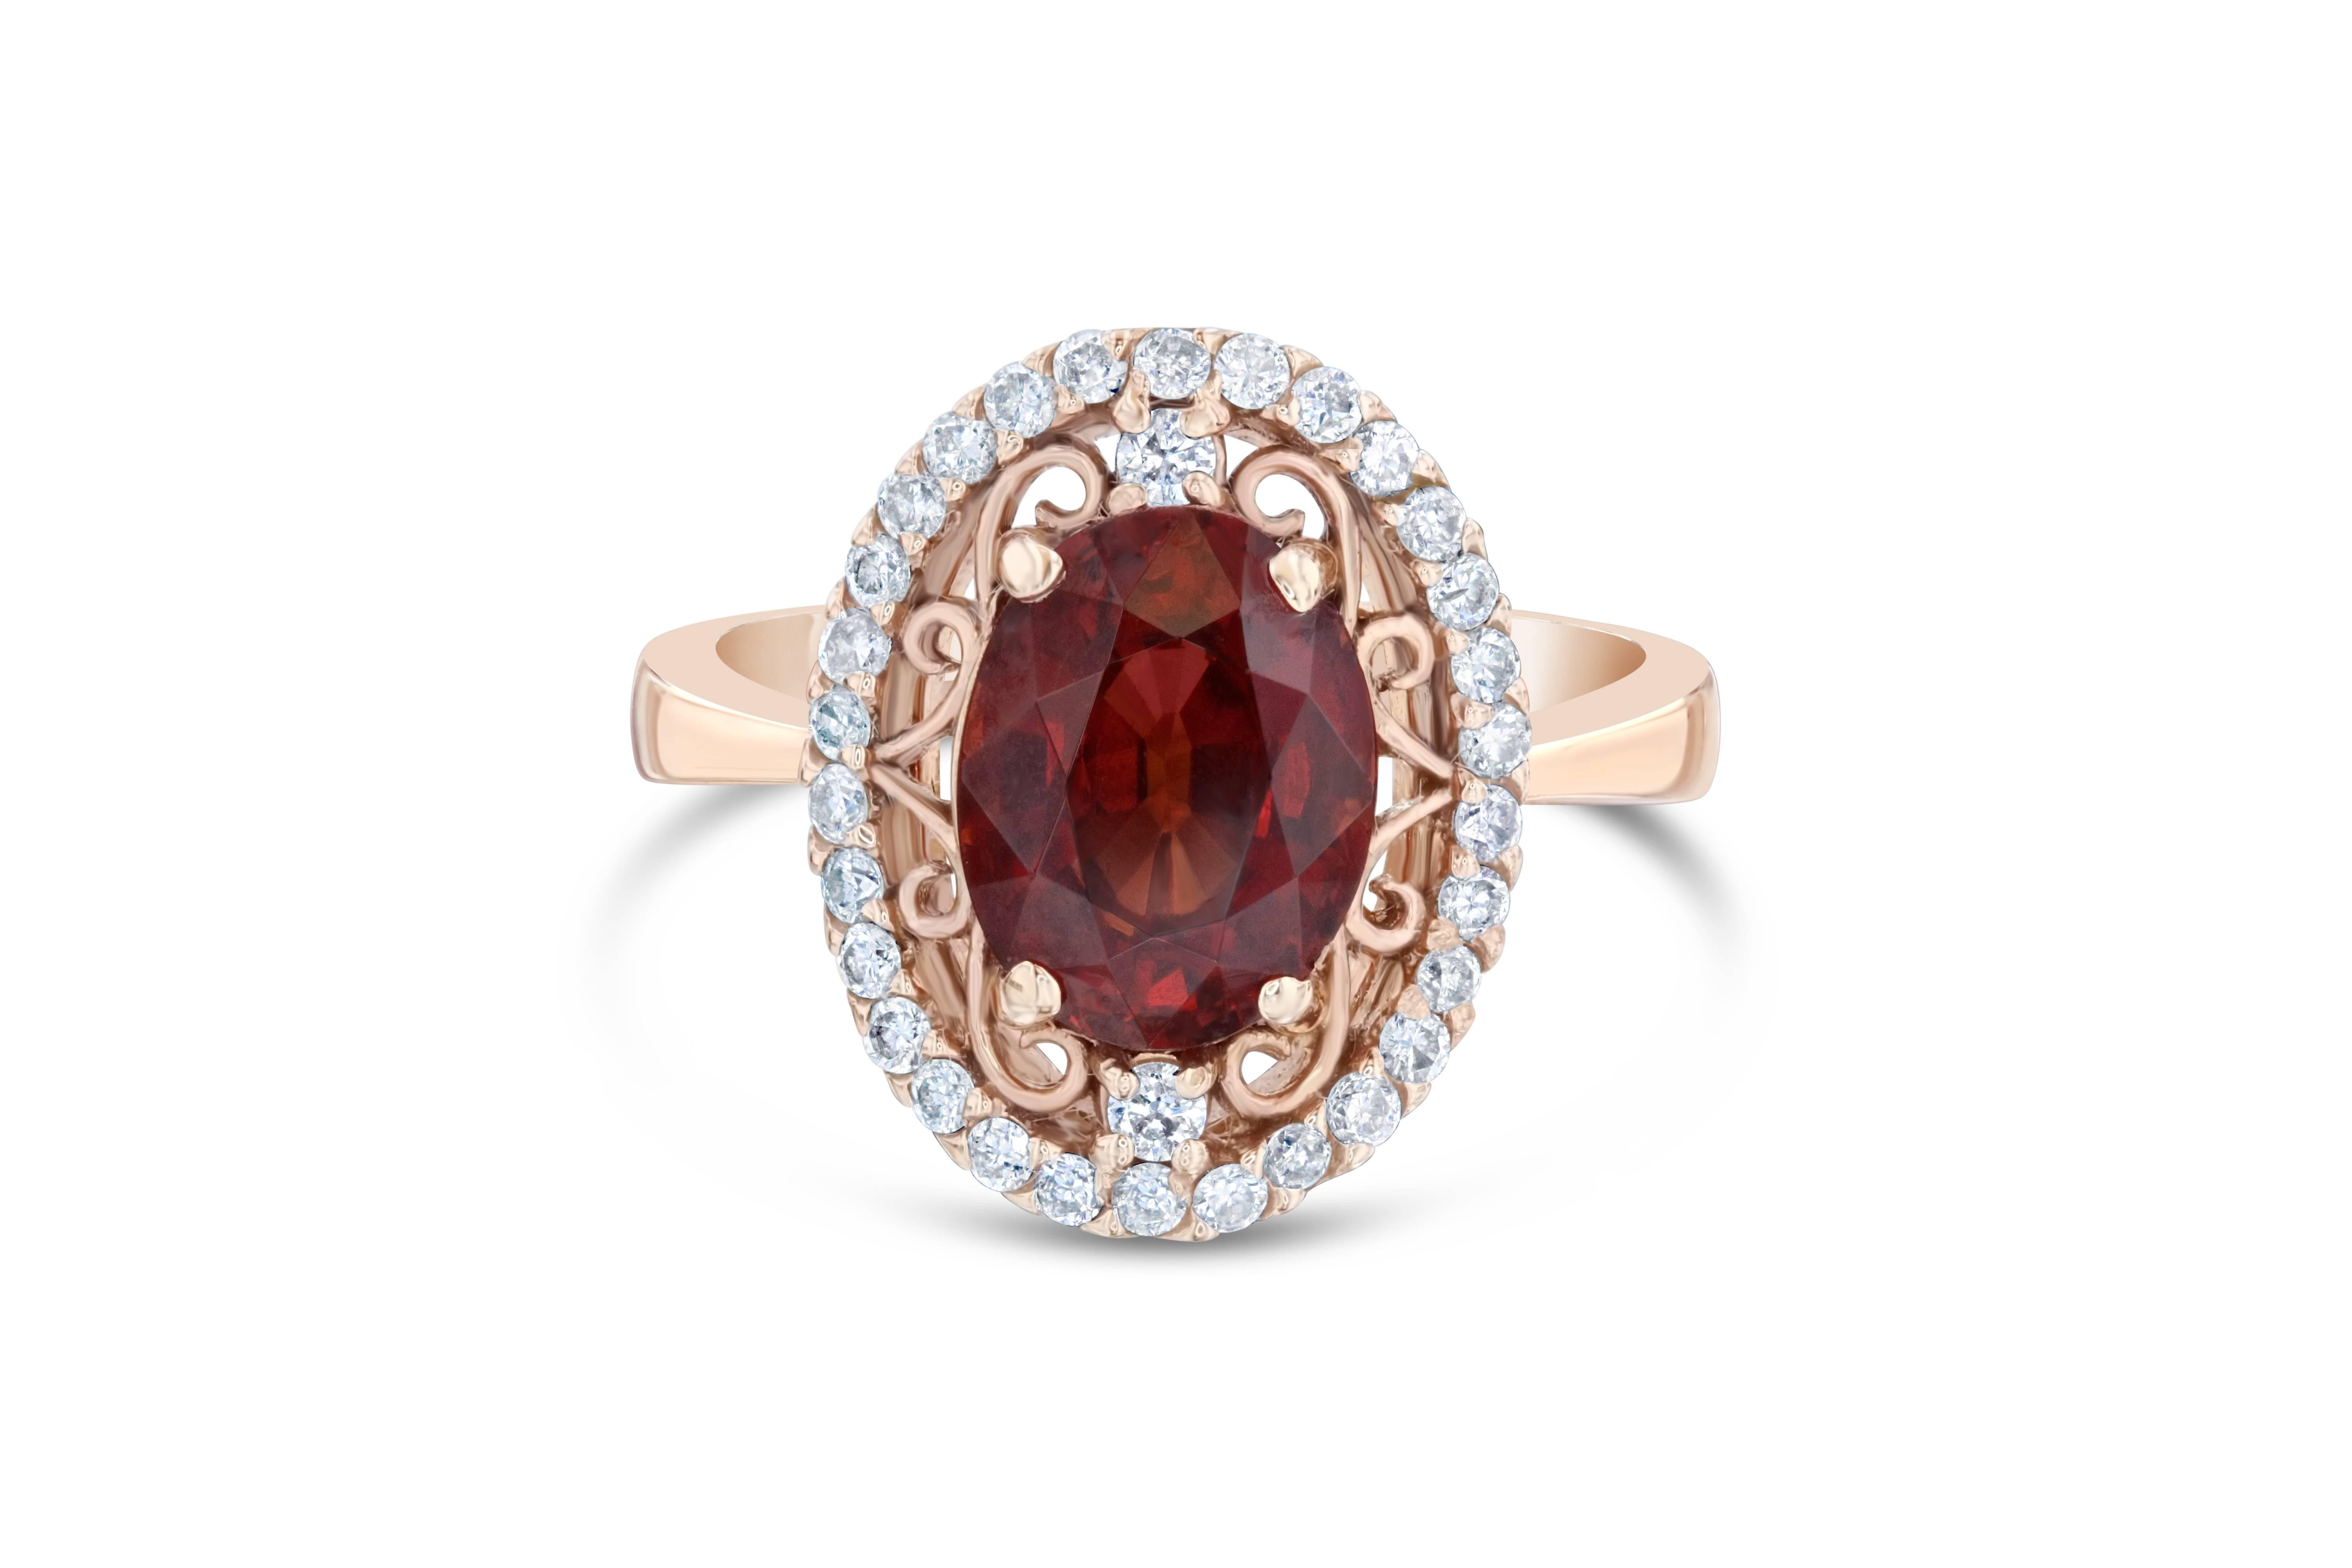 This beautiful ring has a 3.49 carat Oval Cut Spessartine set in the center of the ring. A Spessartine is a natural stone that is actually a part of the Garnet family of stones. The ring is surrounded by 32 Round Cut Diamonds that weigh 0.38 carat.